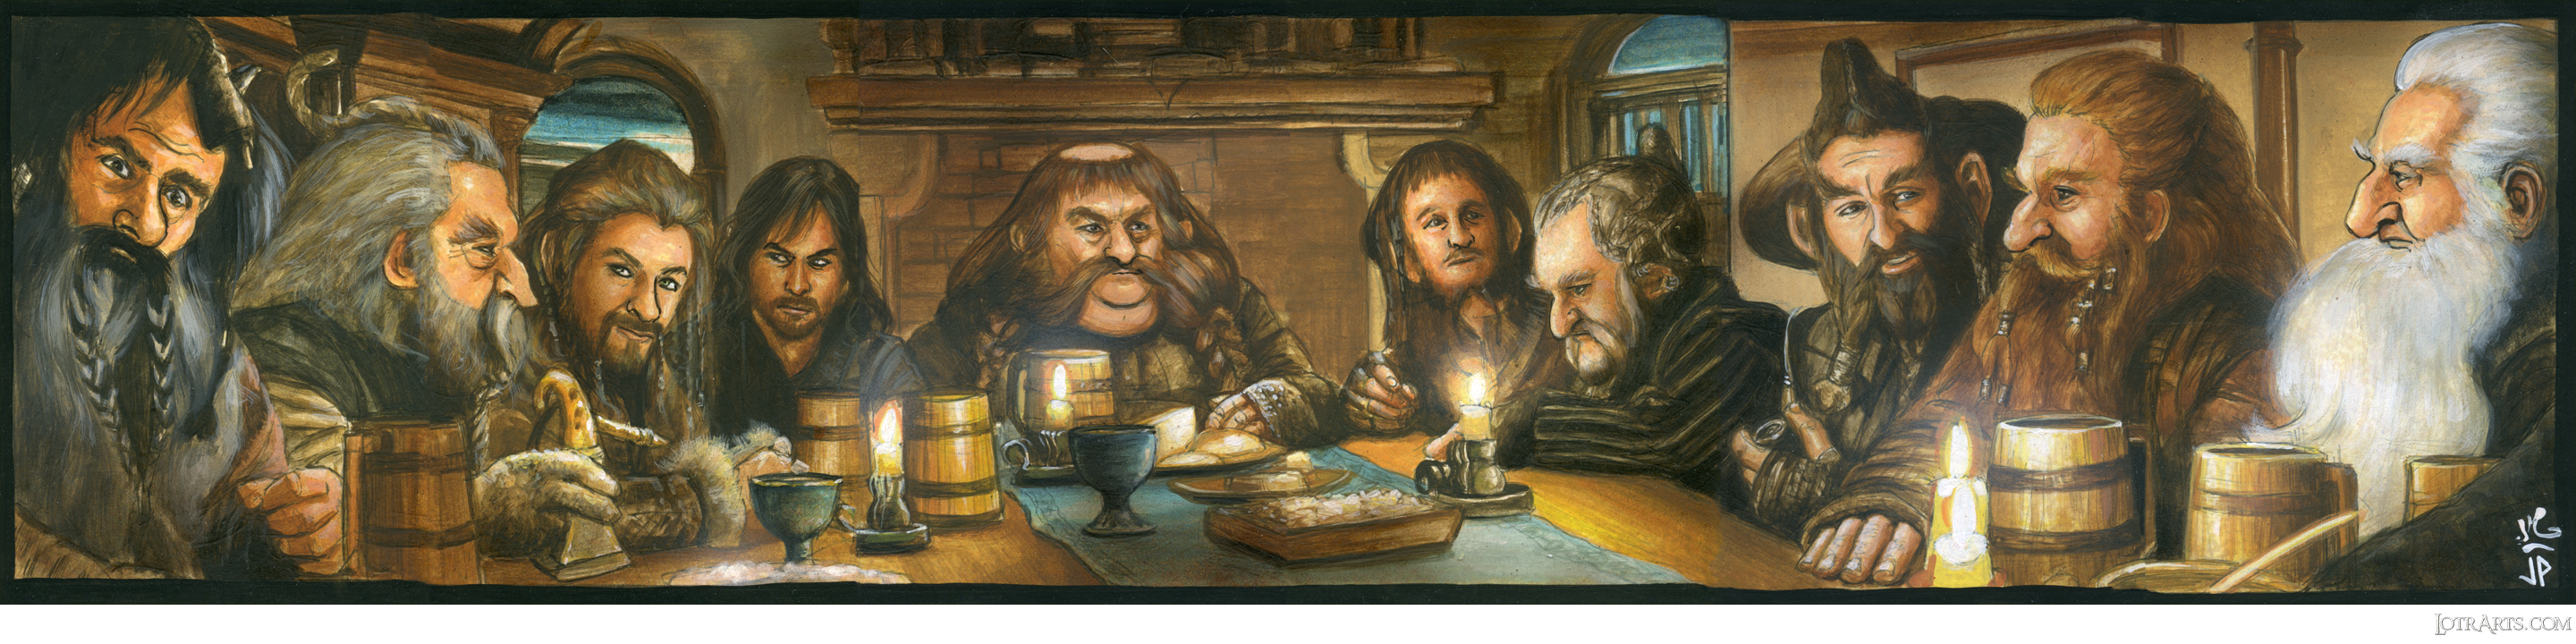 The dwarves meet at Bag End (Part1) by Potratz and Hai, five-card panel (sequenced with three-card panel)<span class="ngViews">7 views</span>